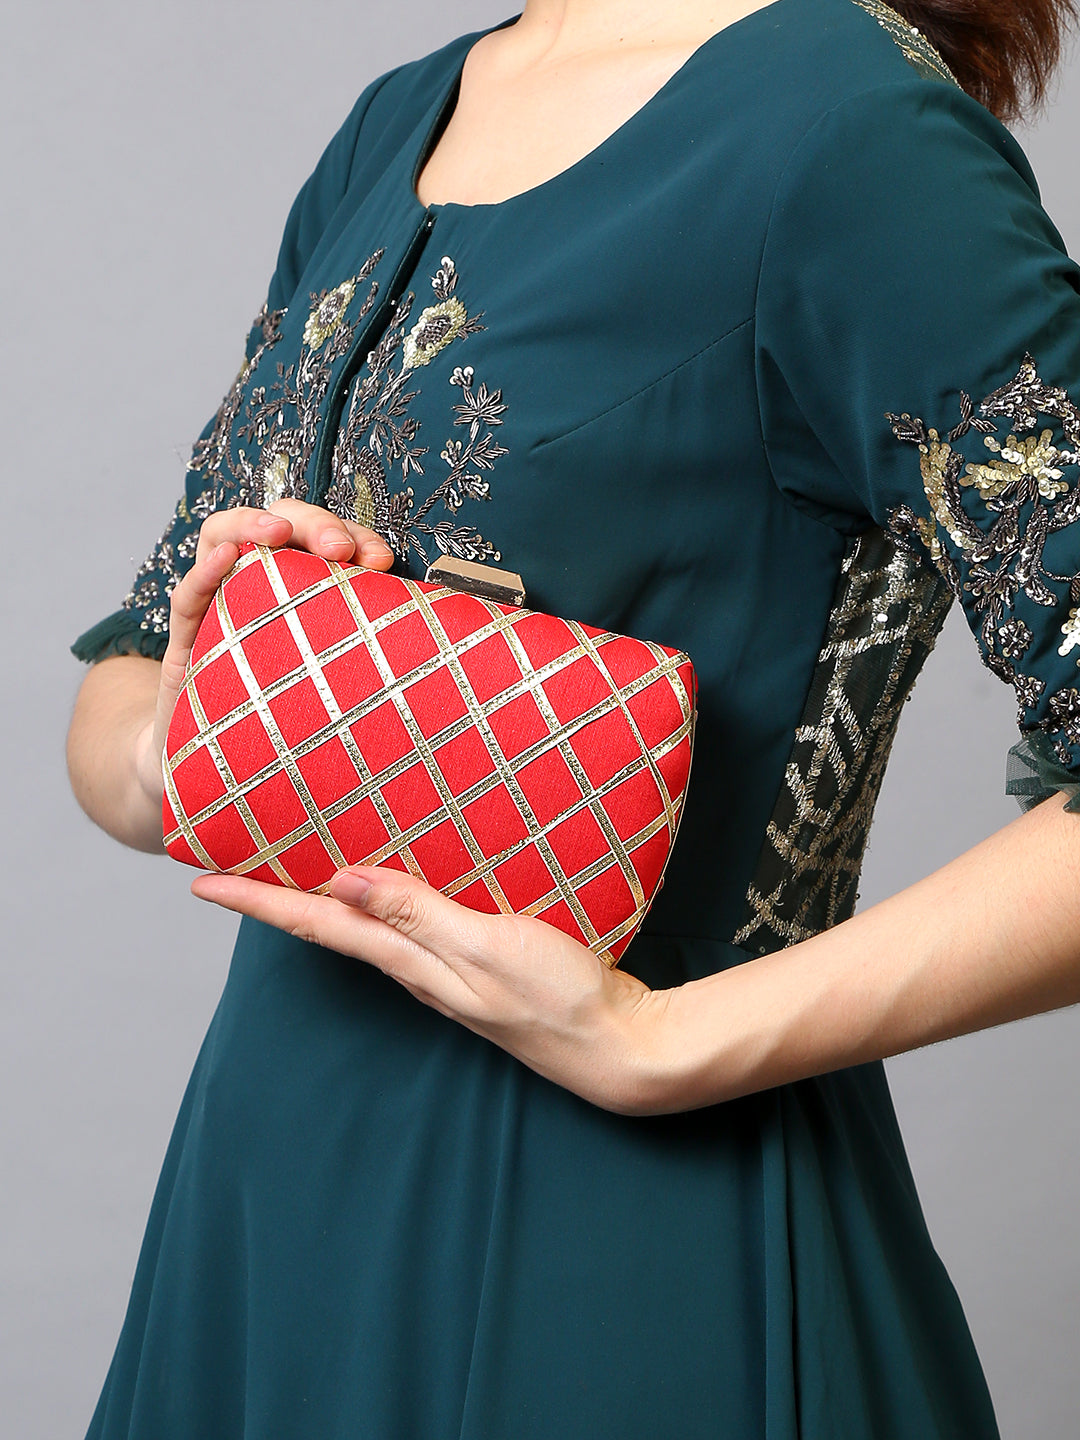 Filauri Cross Pattern Structured Sling Bag Red